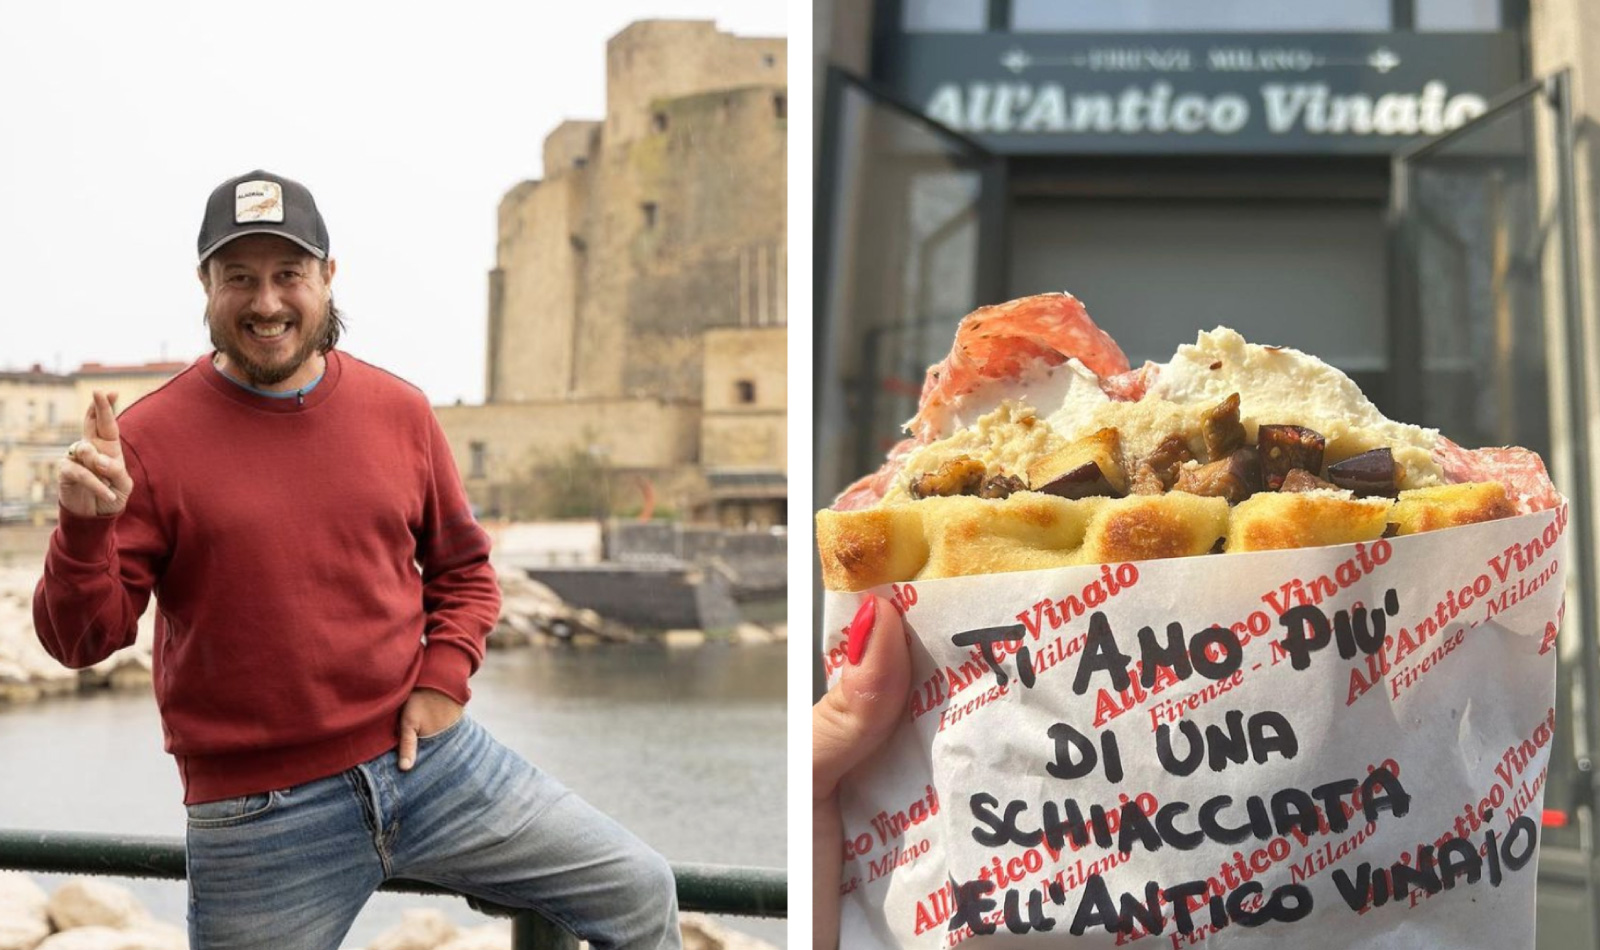 All'antico vinaio also arrives in Naples